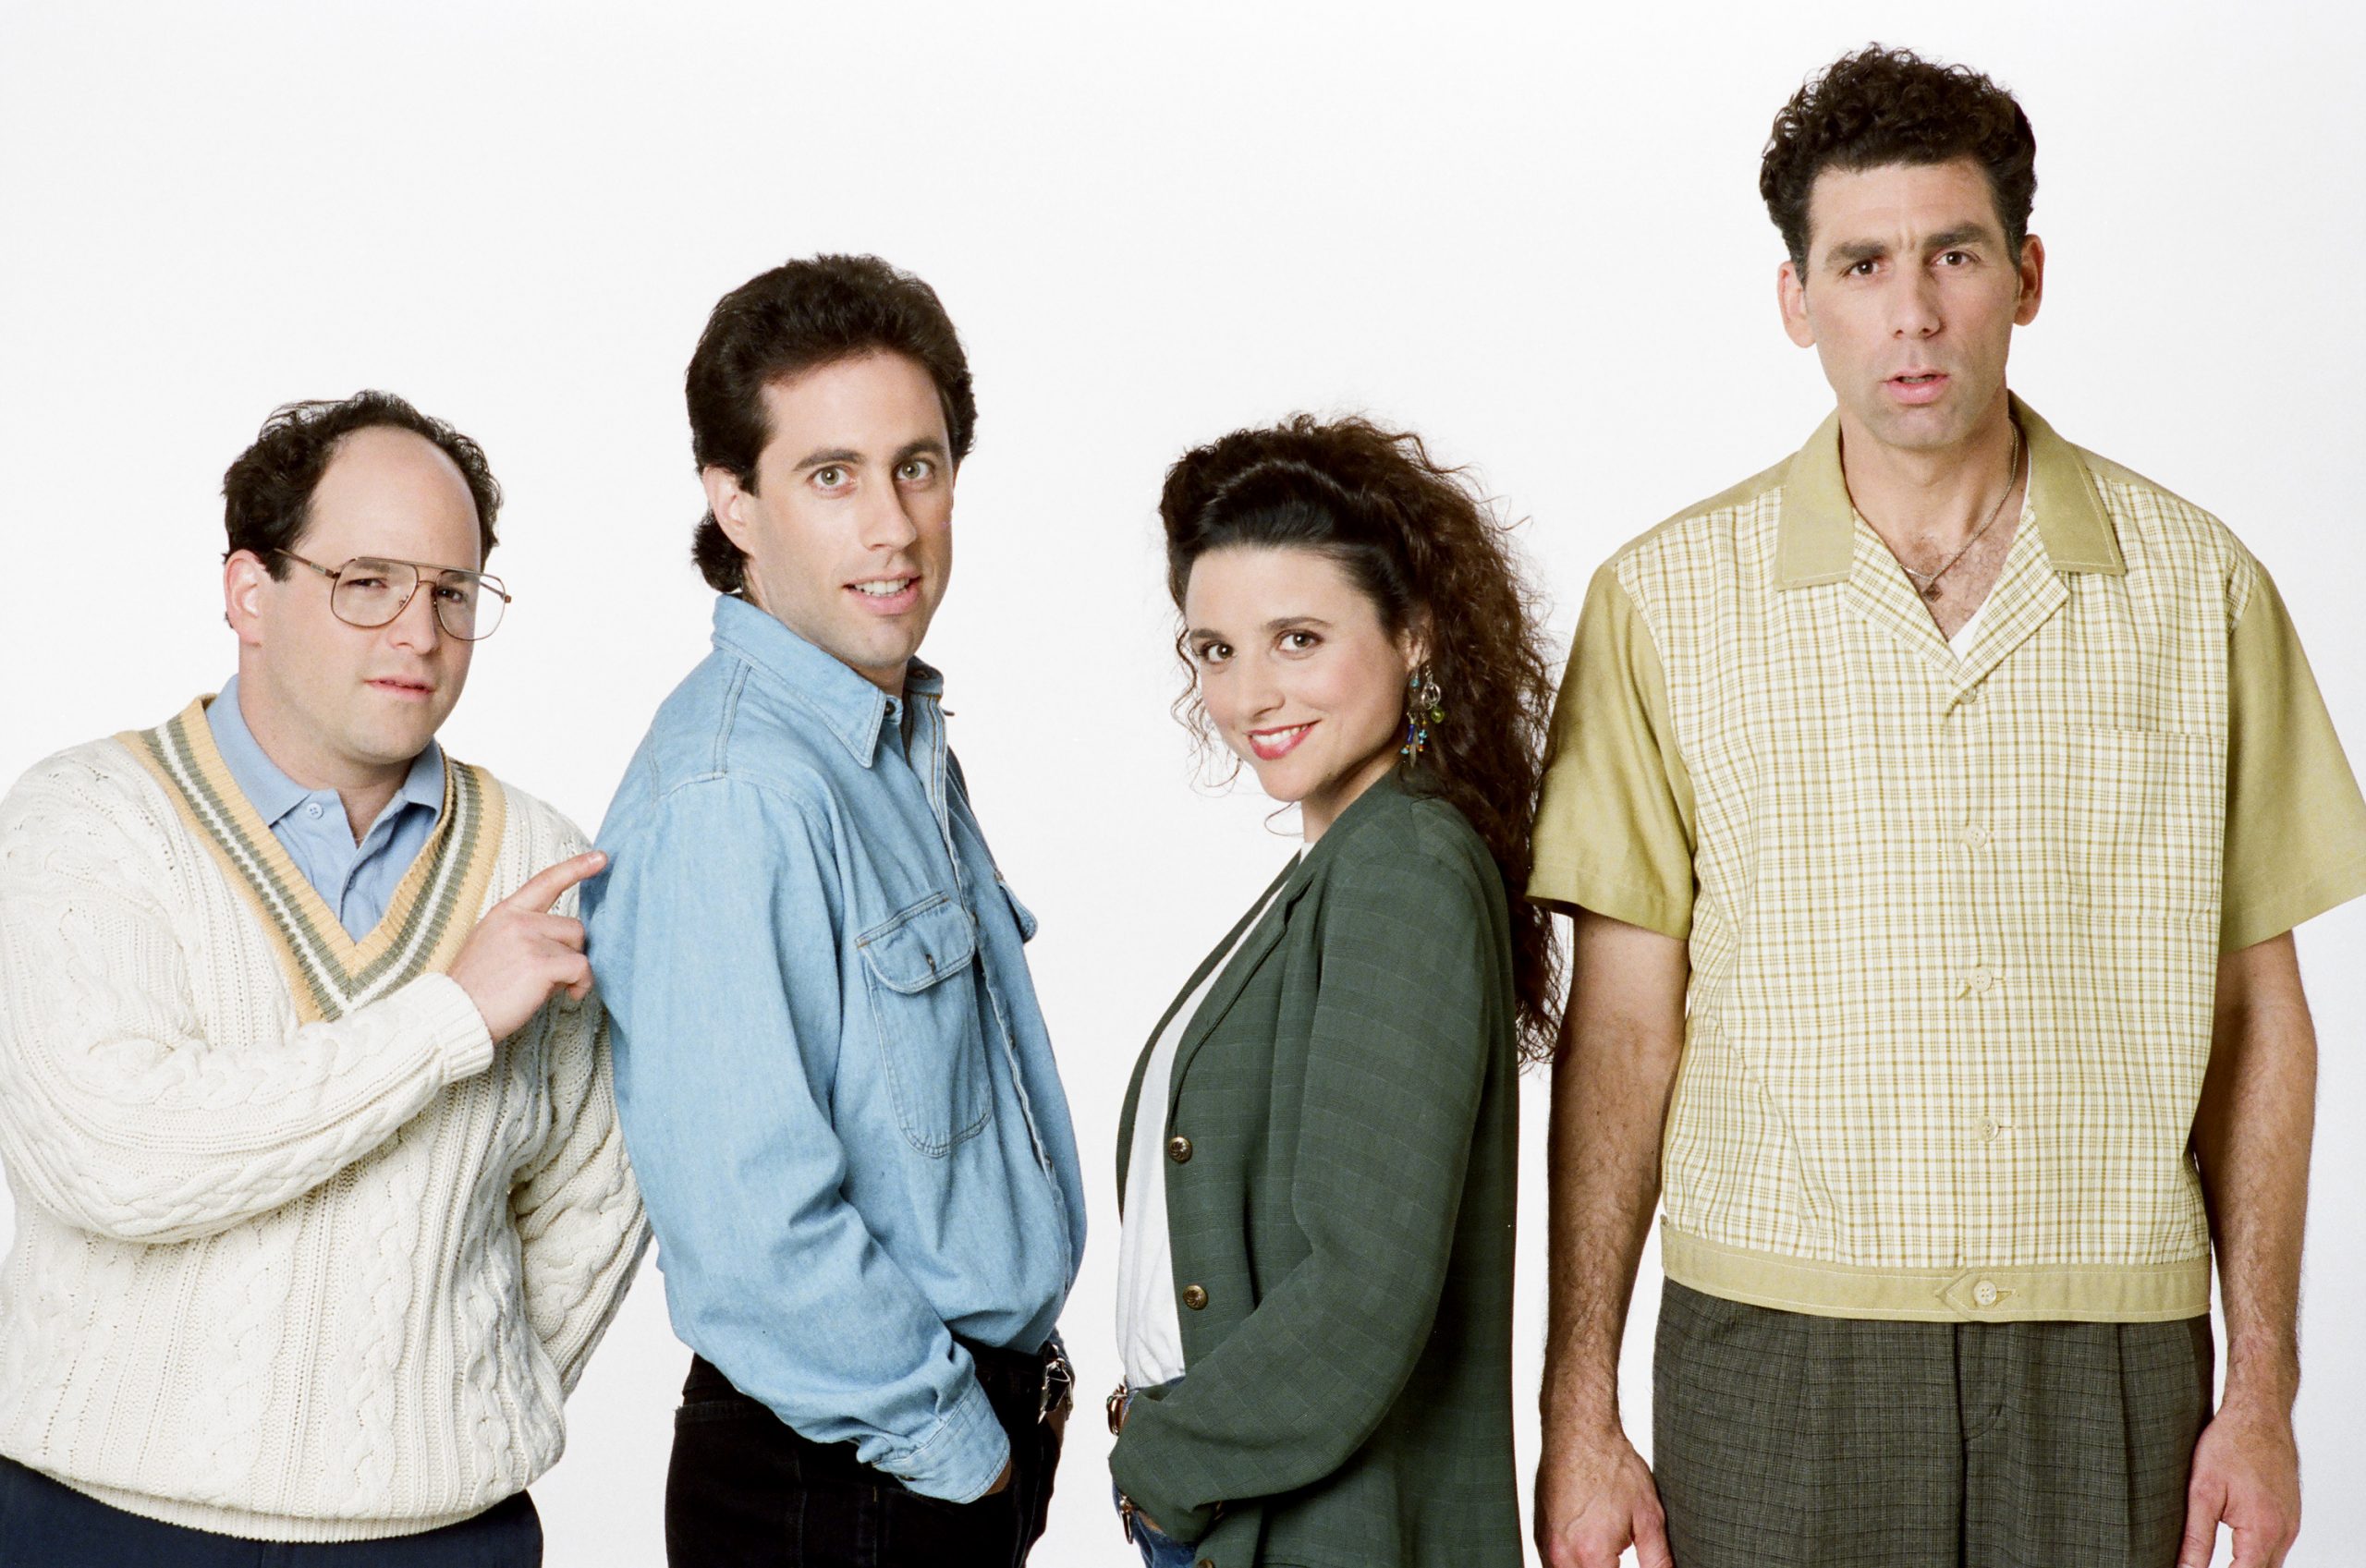 Jason Alexander as George Costanza, Jerry Seinfeld as Jerry Seinfeld, Julia Louis-Dreyfus as Elaine Benes and Michael Richards as Cosmo Kramer pose for a promotional photo